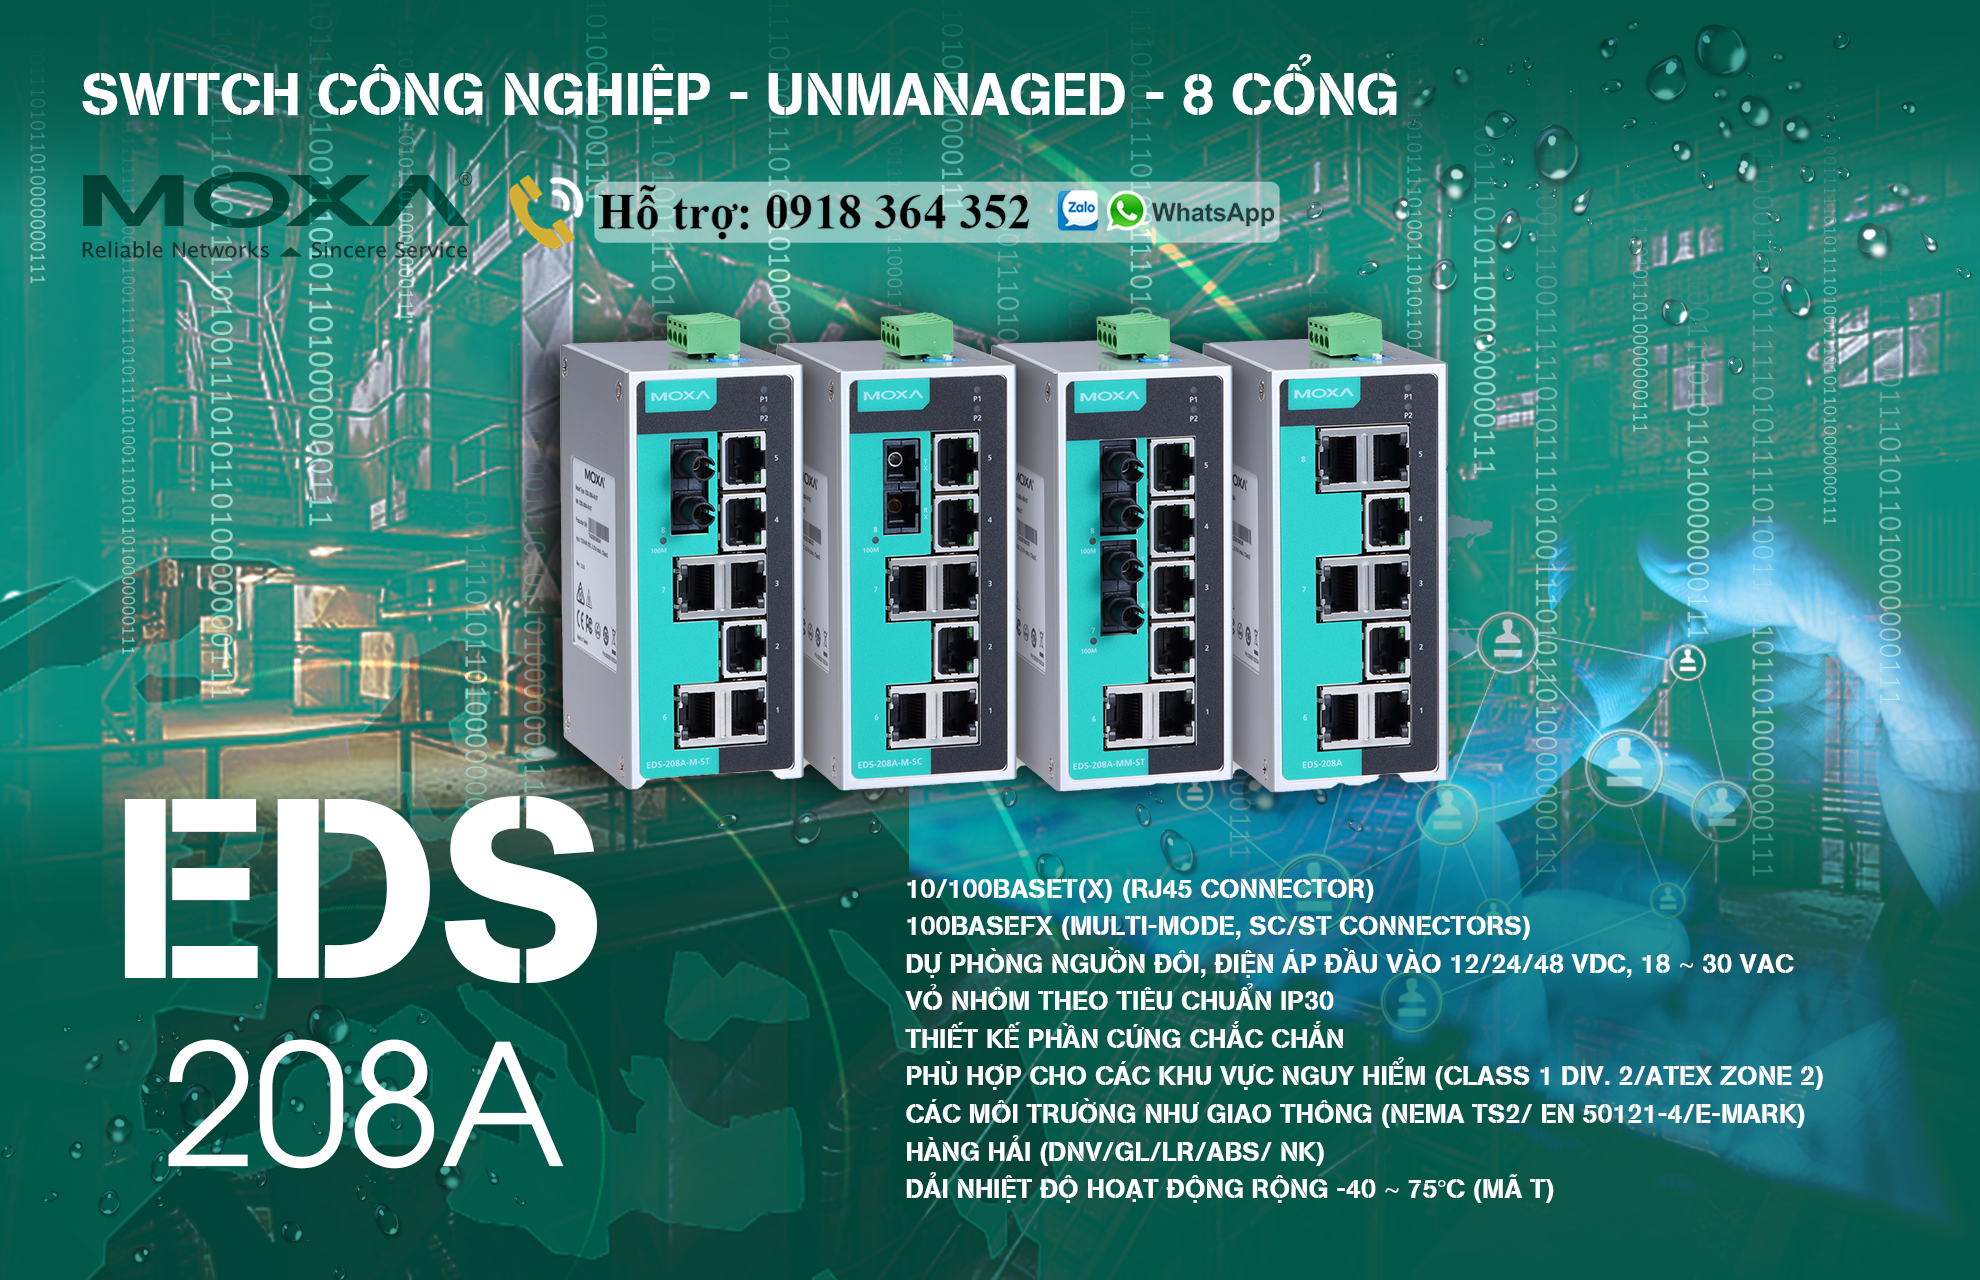 eds-208a-mm-st-switch-cong-nghiep-8-cong-toc-do-10-100m-dai-ly-switch-mang-cong-nghiep-moxa-viet-nam.png